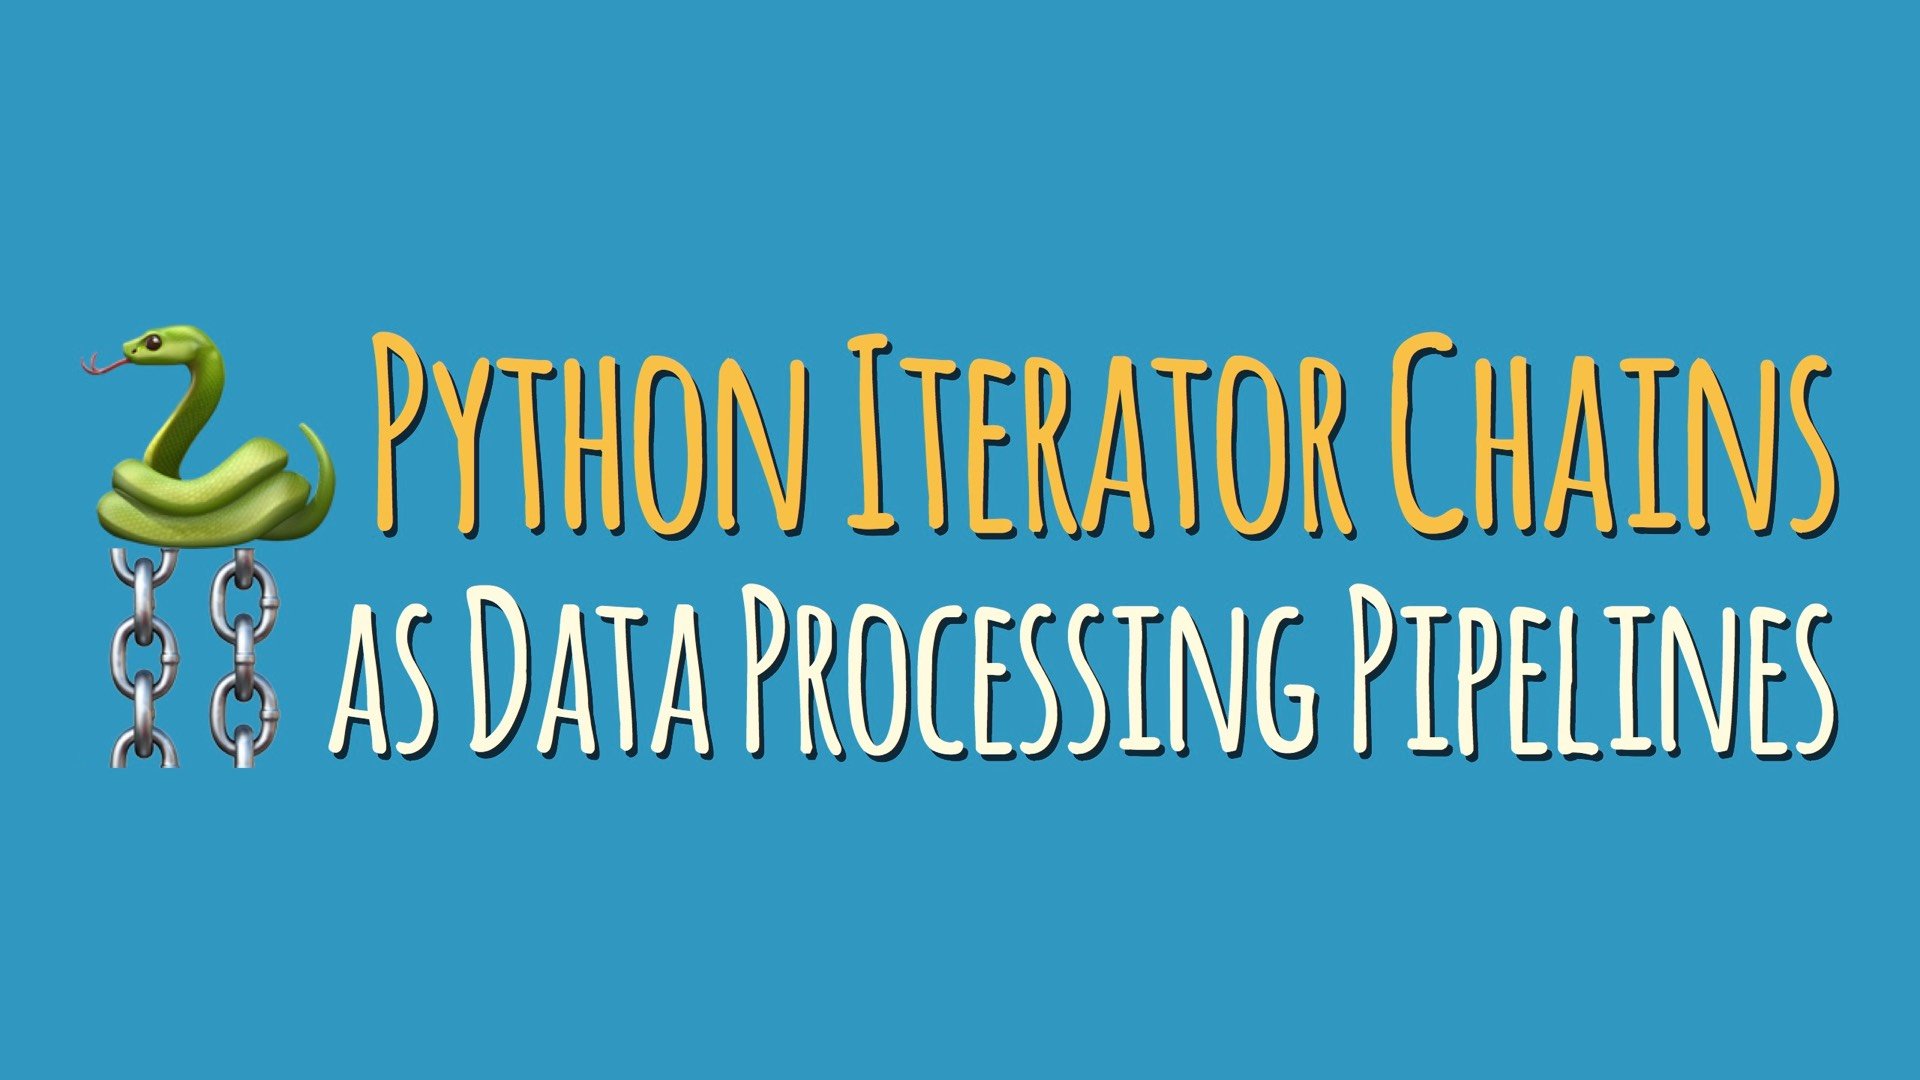 Iterator Chains as Pythonic Data Processing Pipelines